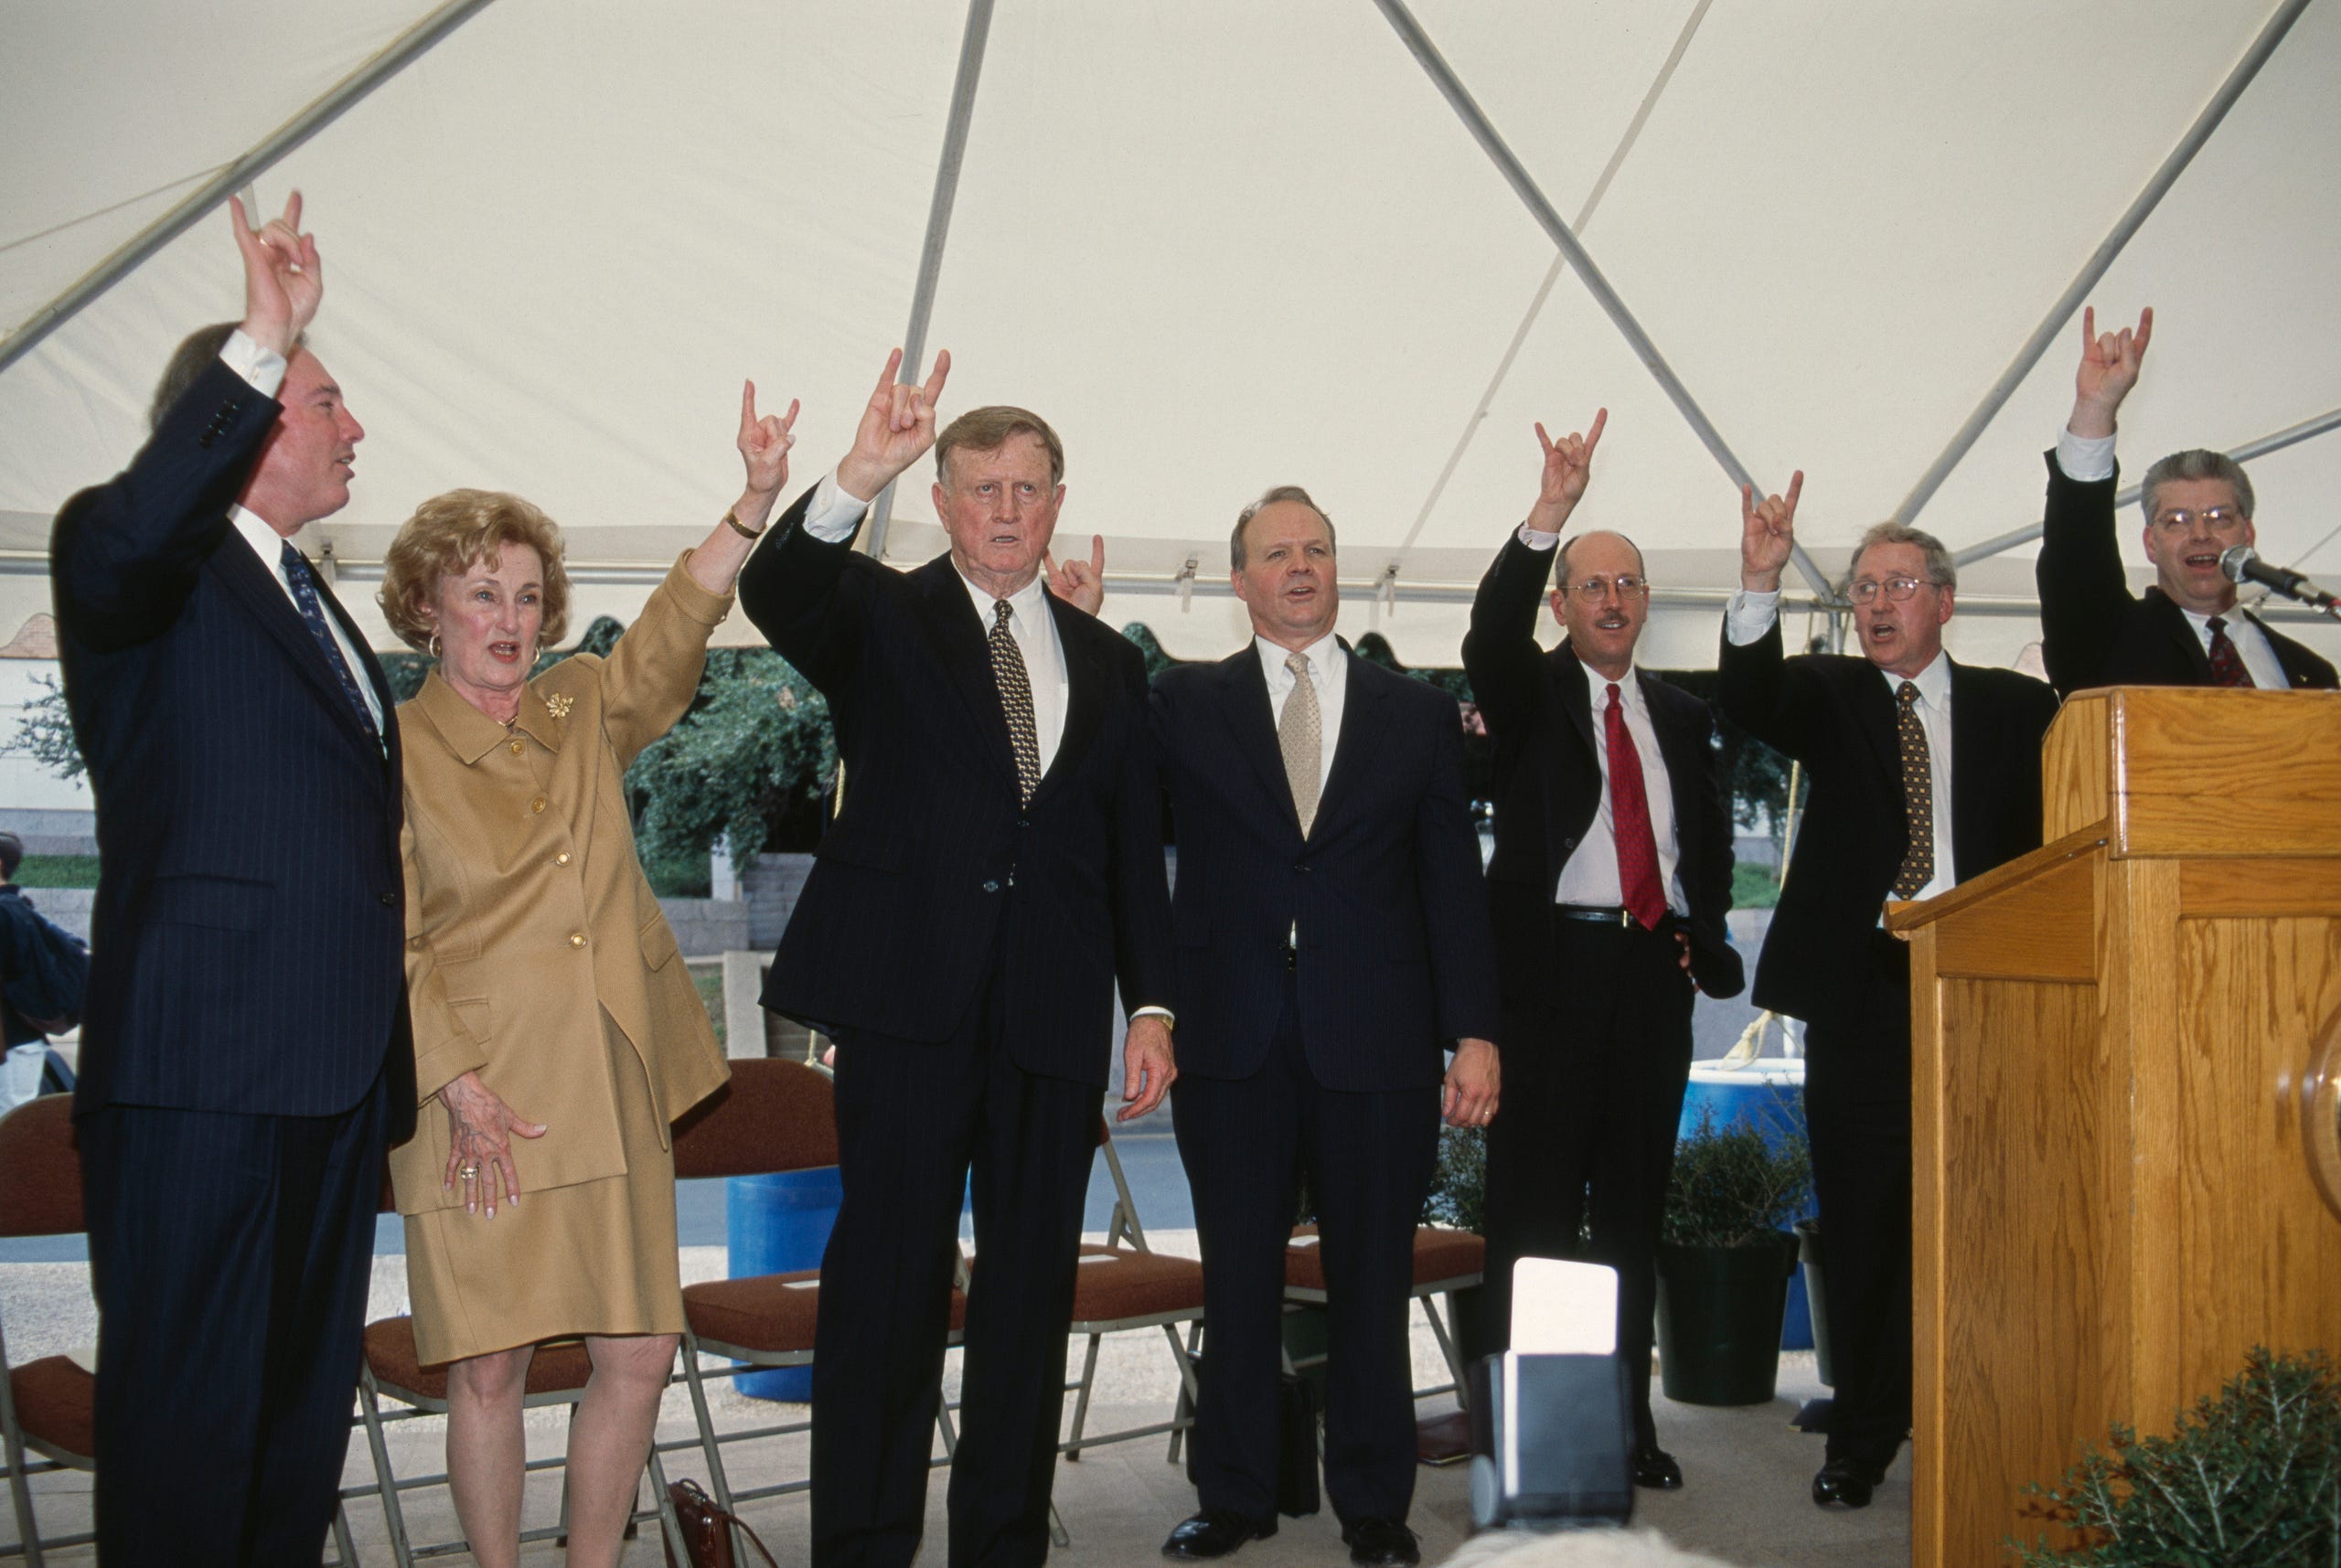 Red McCombs, Charline McCombs, and University of Texas staff stand on a stage making the Hook ’em Horns hand symbol.